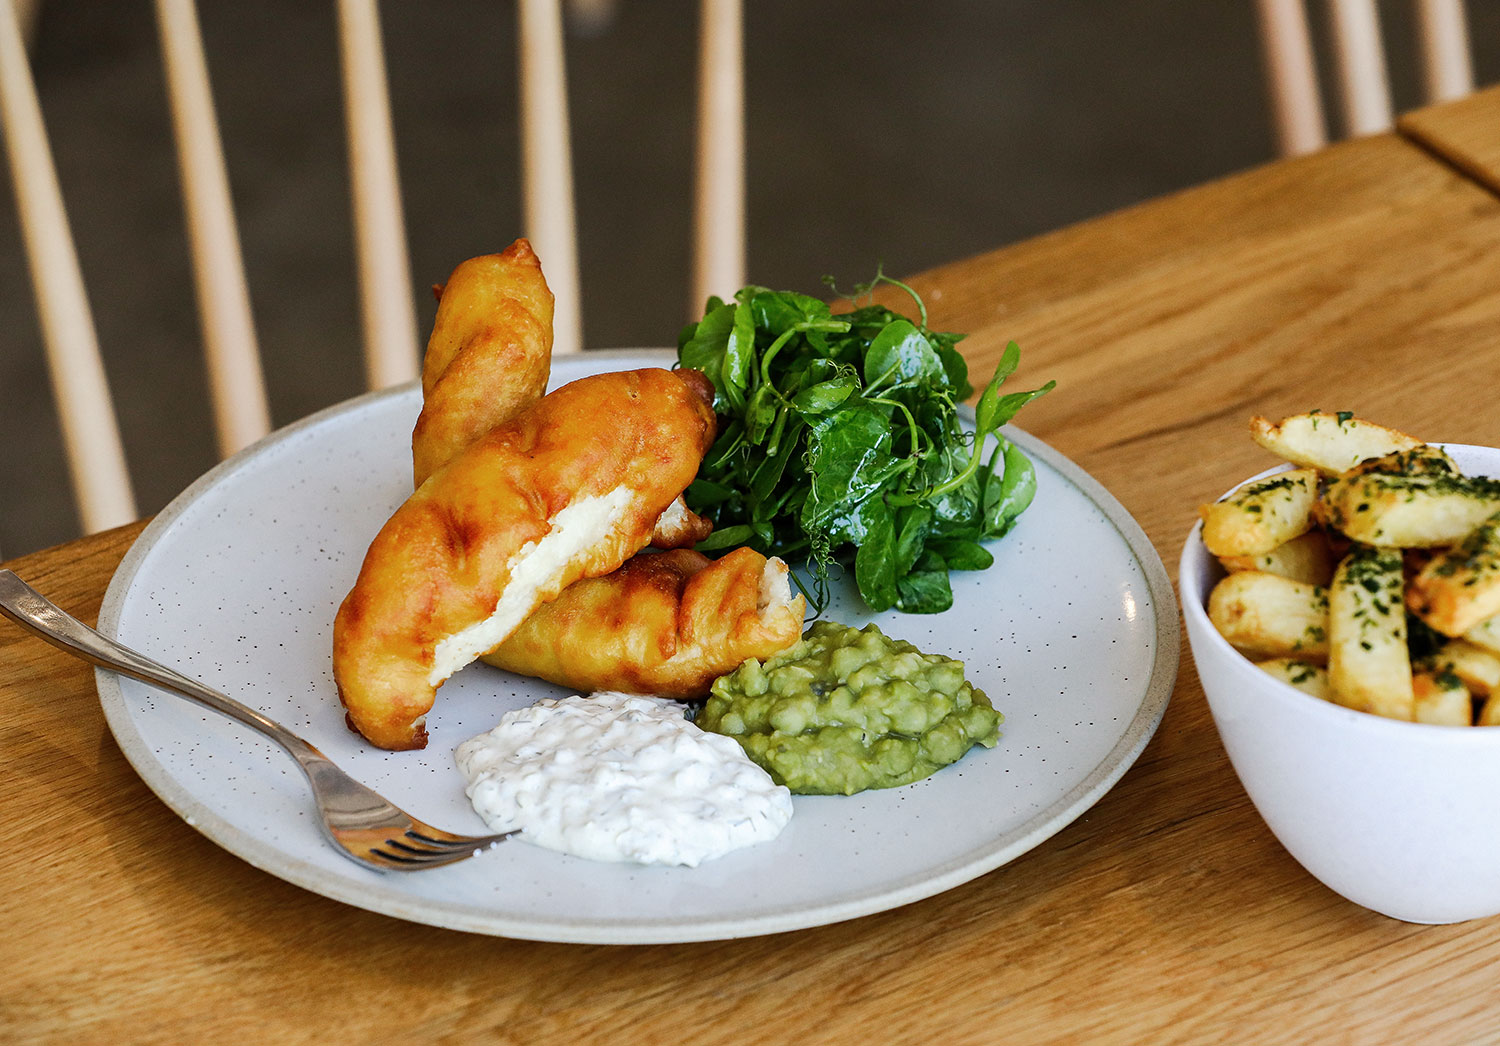 Beer Battered Fish with Mushy Peas